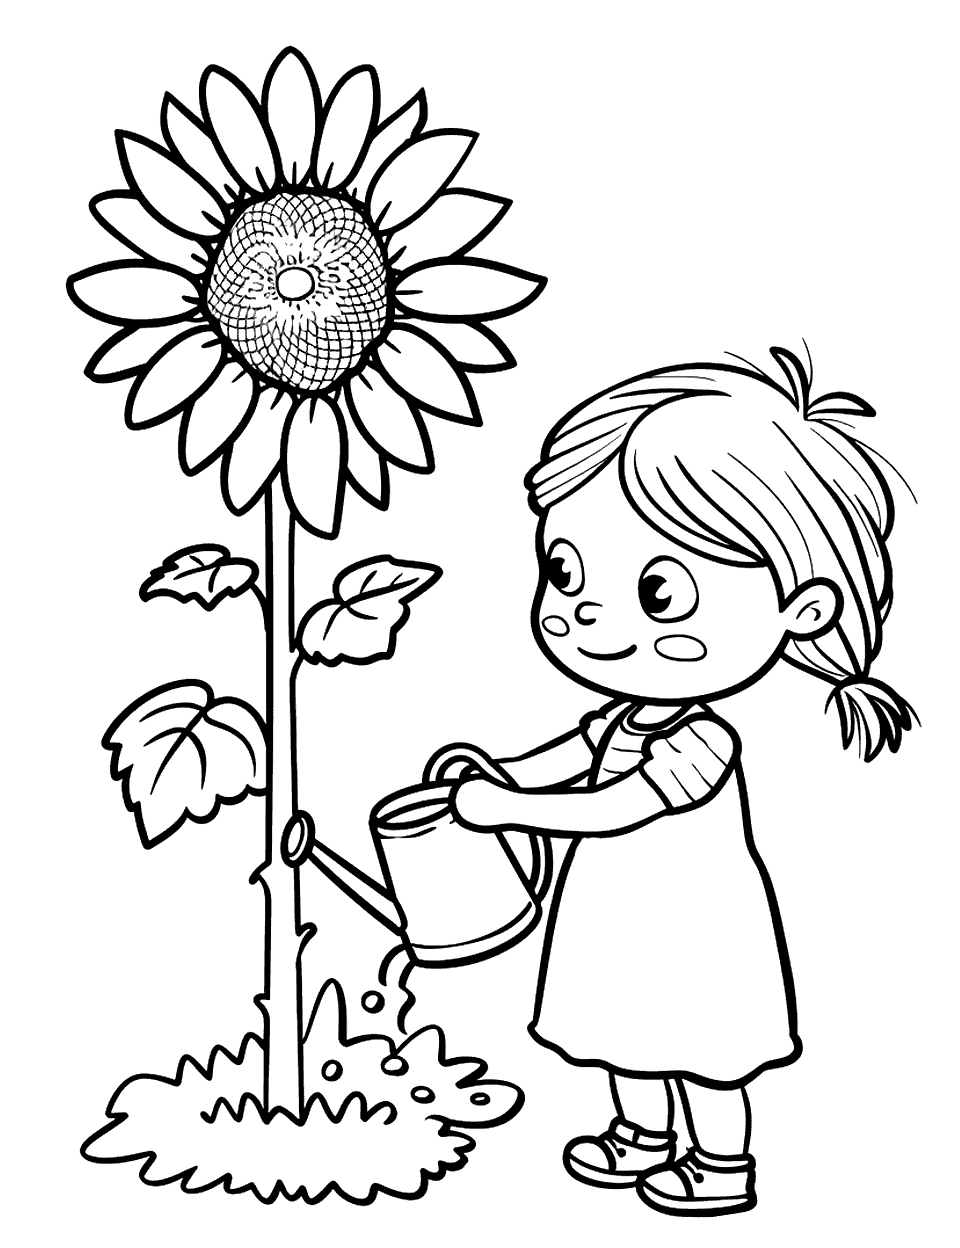 Garden Helper Toddler Coloring Page - A child watering a single, large sunflower in a garden.